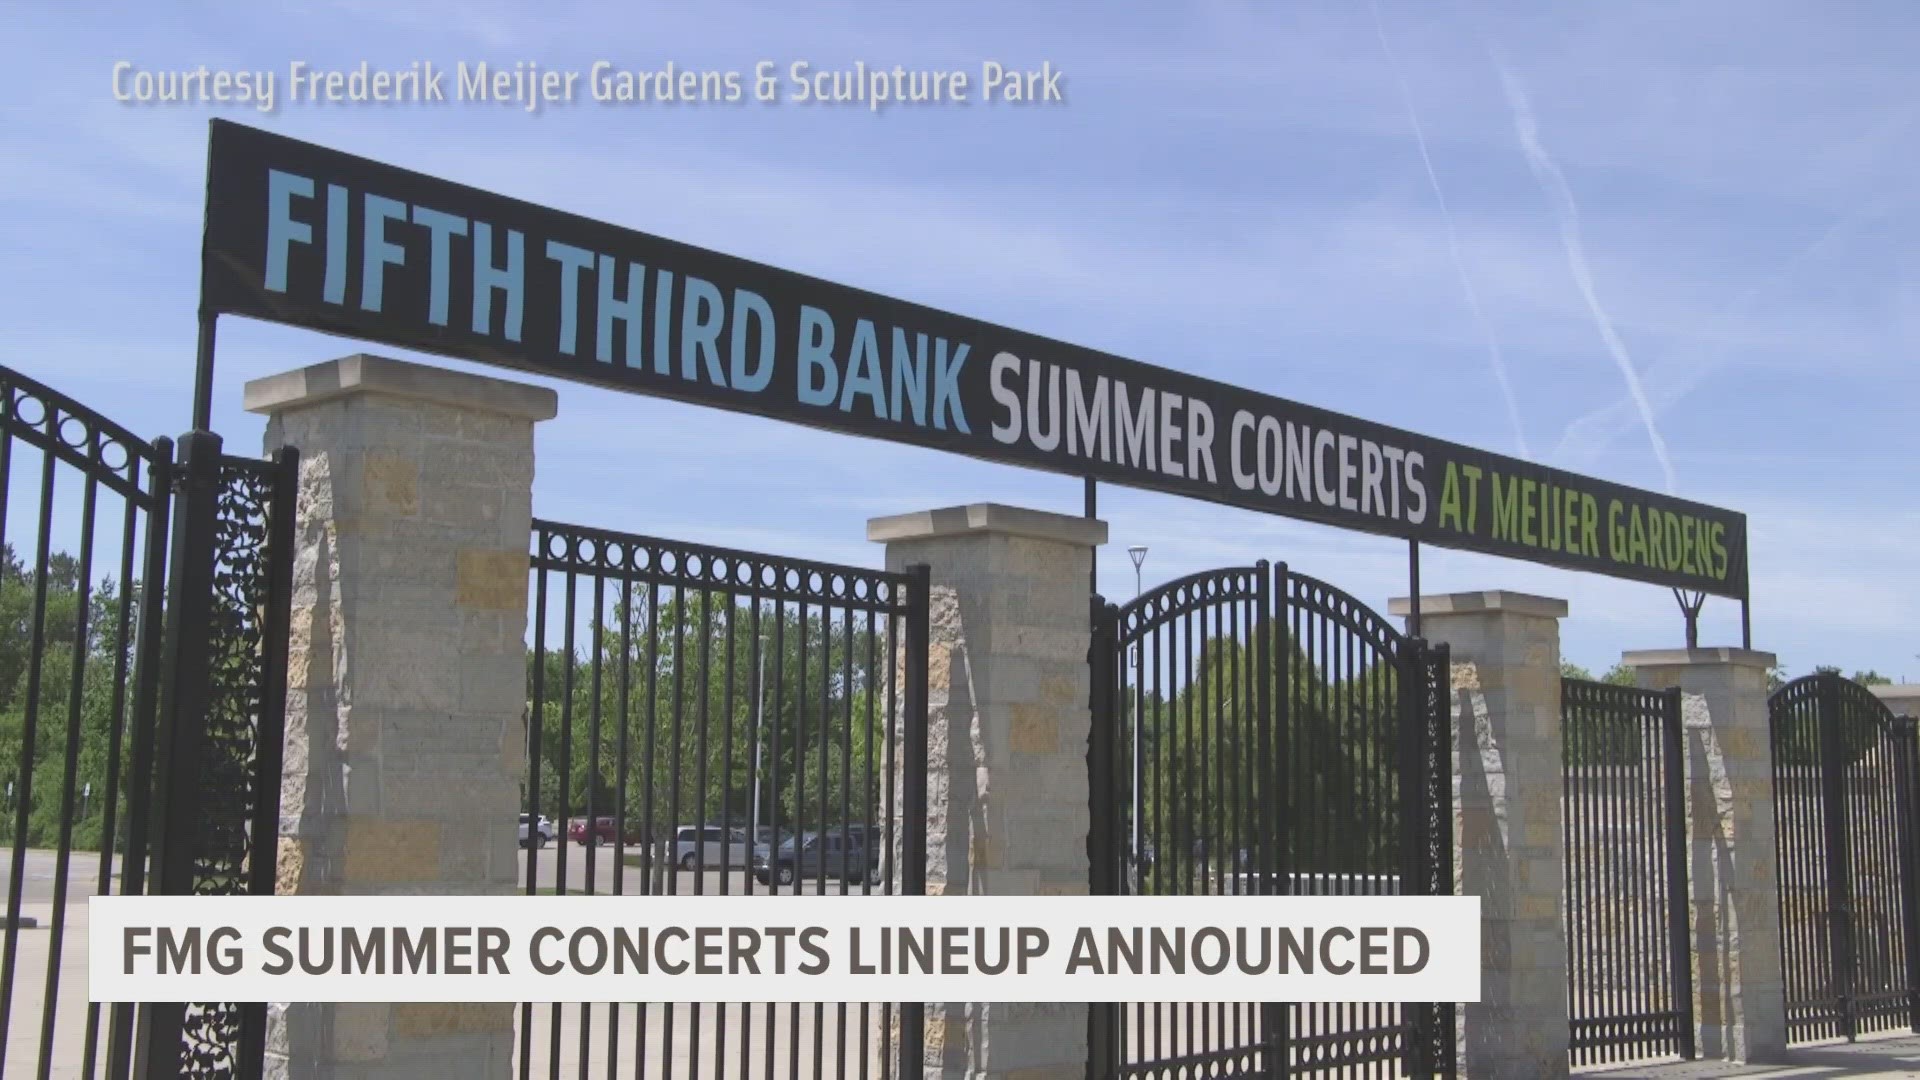 The Summer Concert Series is bringing back some favorites from years past and featuring some new acts at the venue.